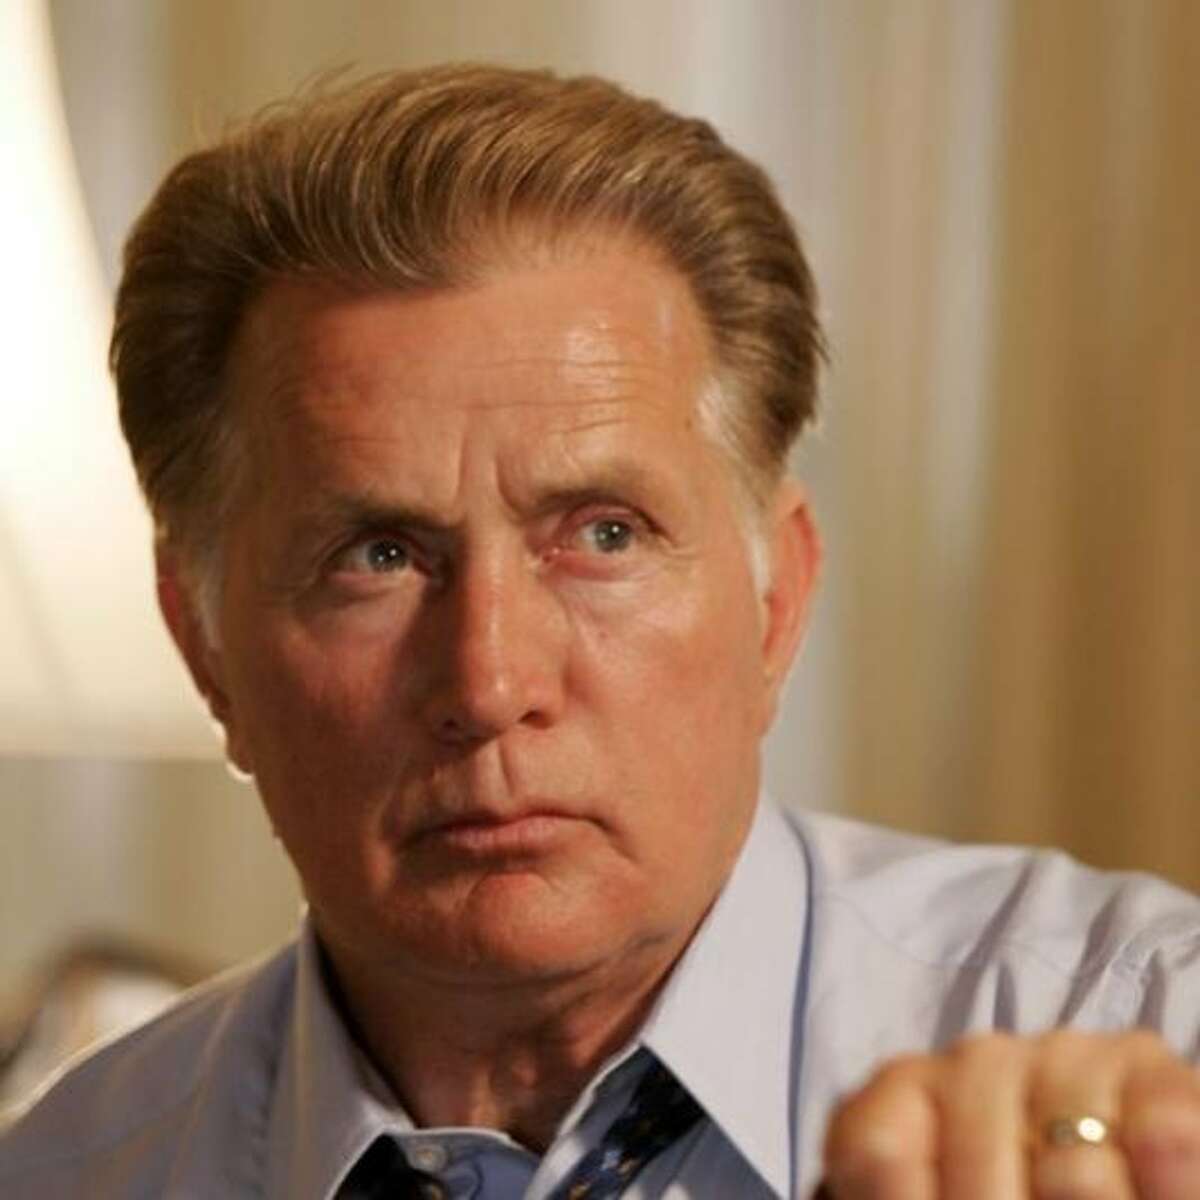 THE WEST WING -- NBC Series -- "Things Fall Apart" -- Pictured: Martin Sheen as President Josiah Bartlet -- NBC Universal Photo: Paul Drinkwater